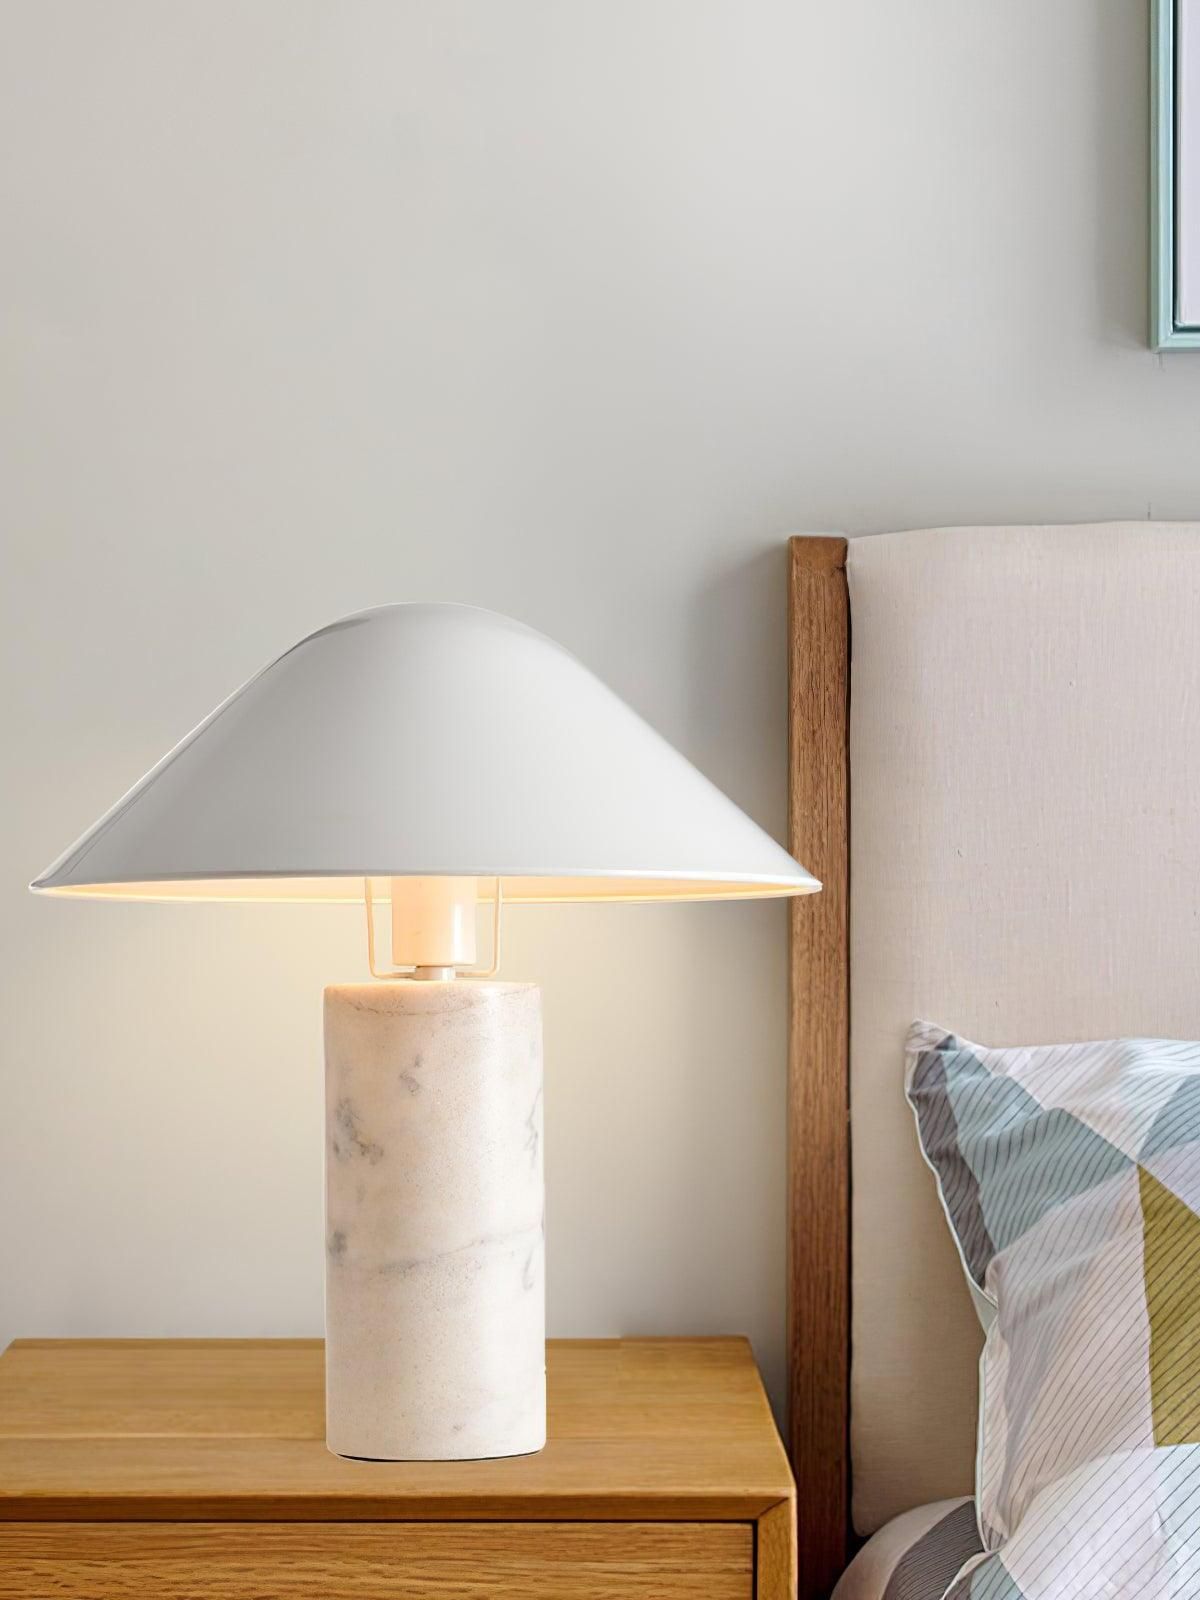 Picture Lamp Illuminate Your Wall Decor with a Stylish and Functional Lamp for Pictures